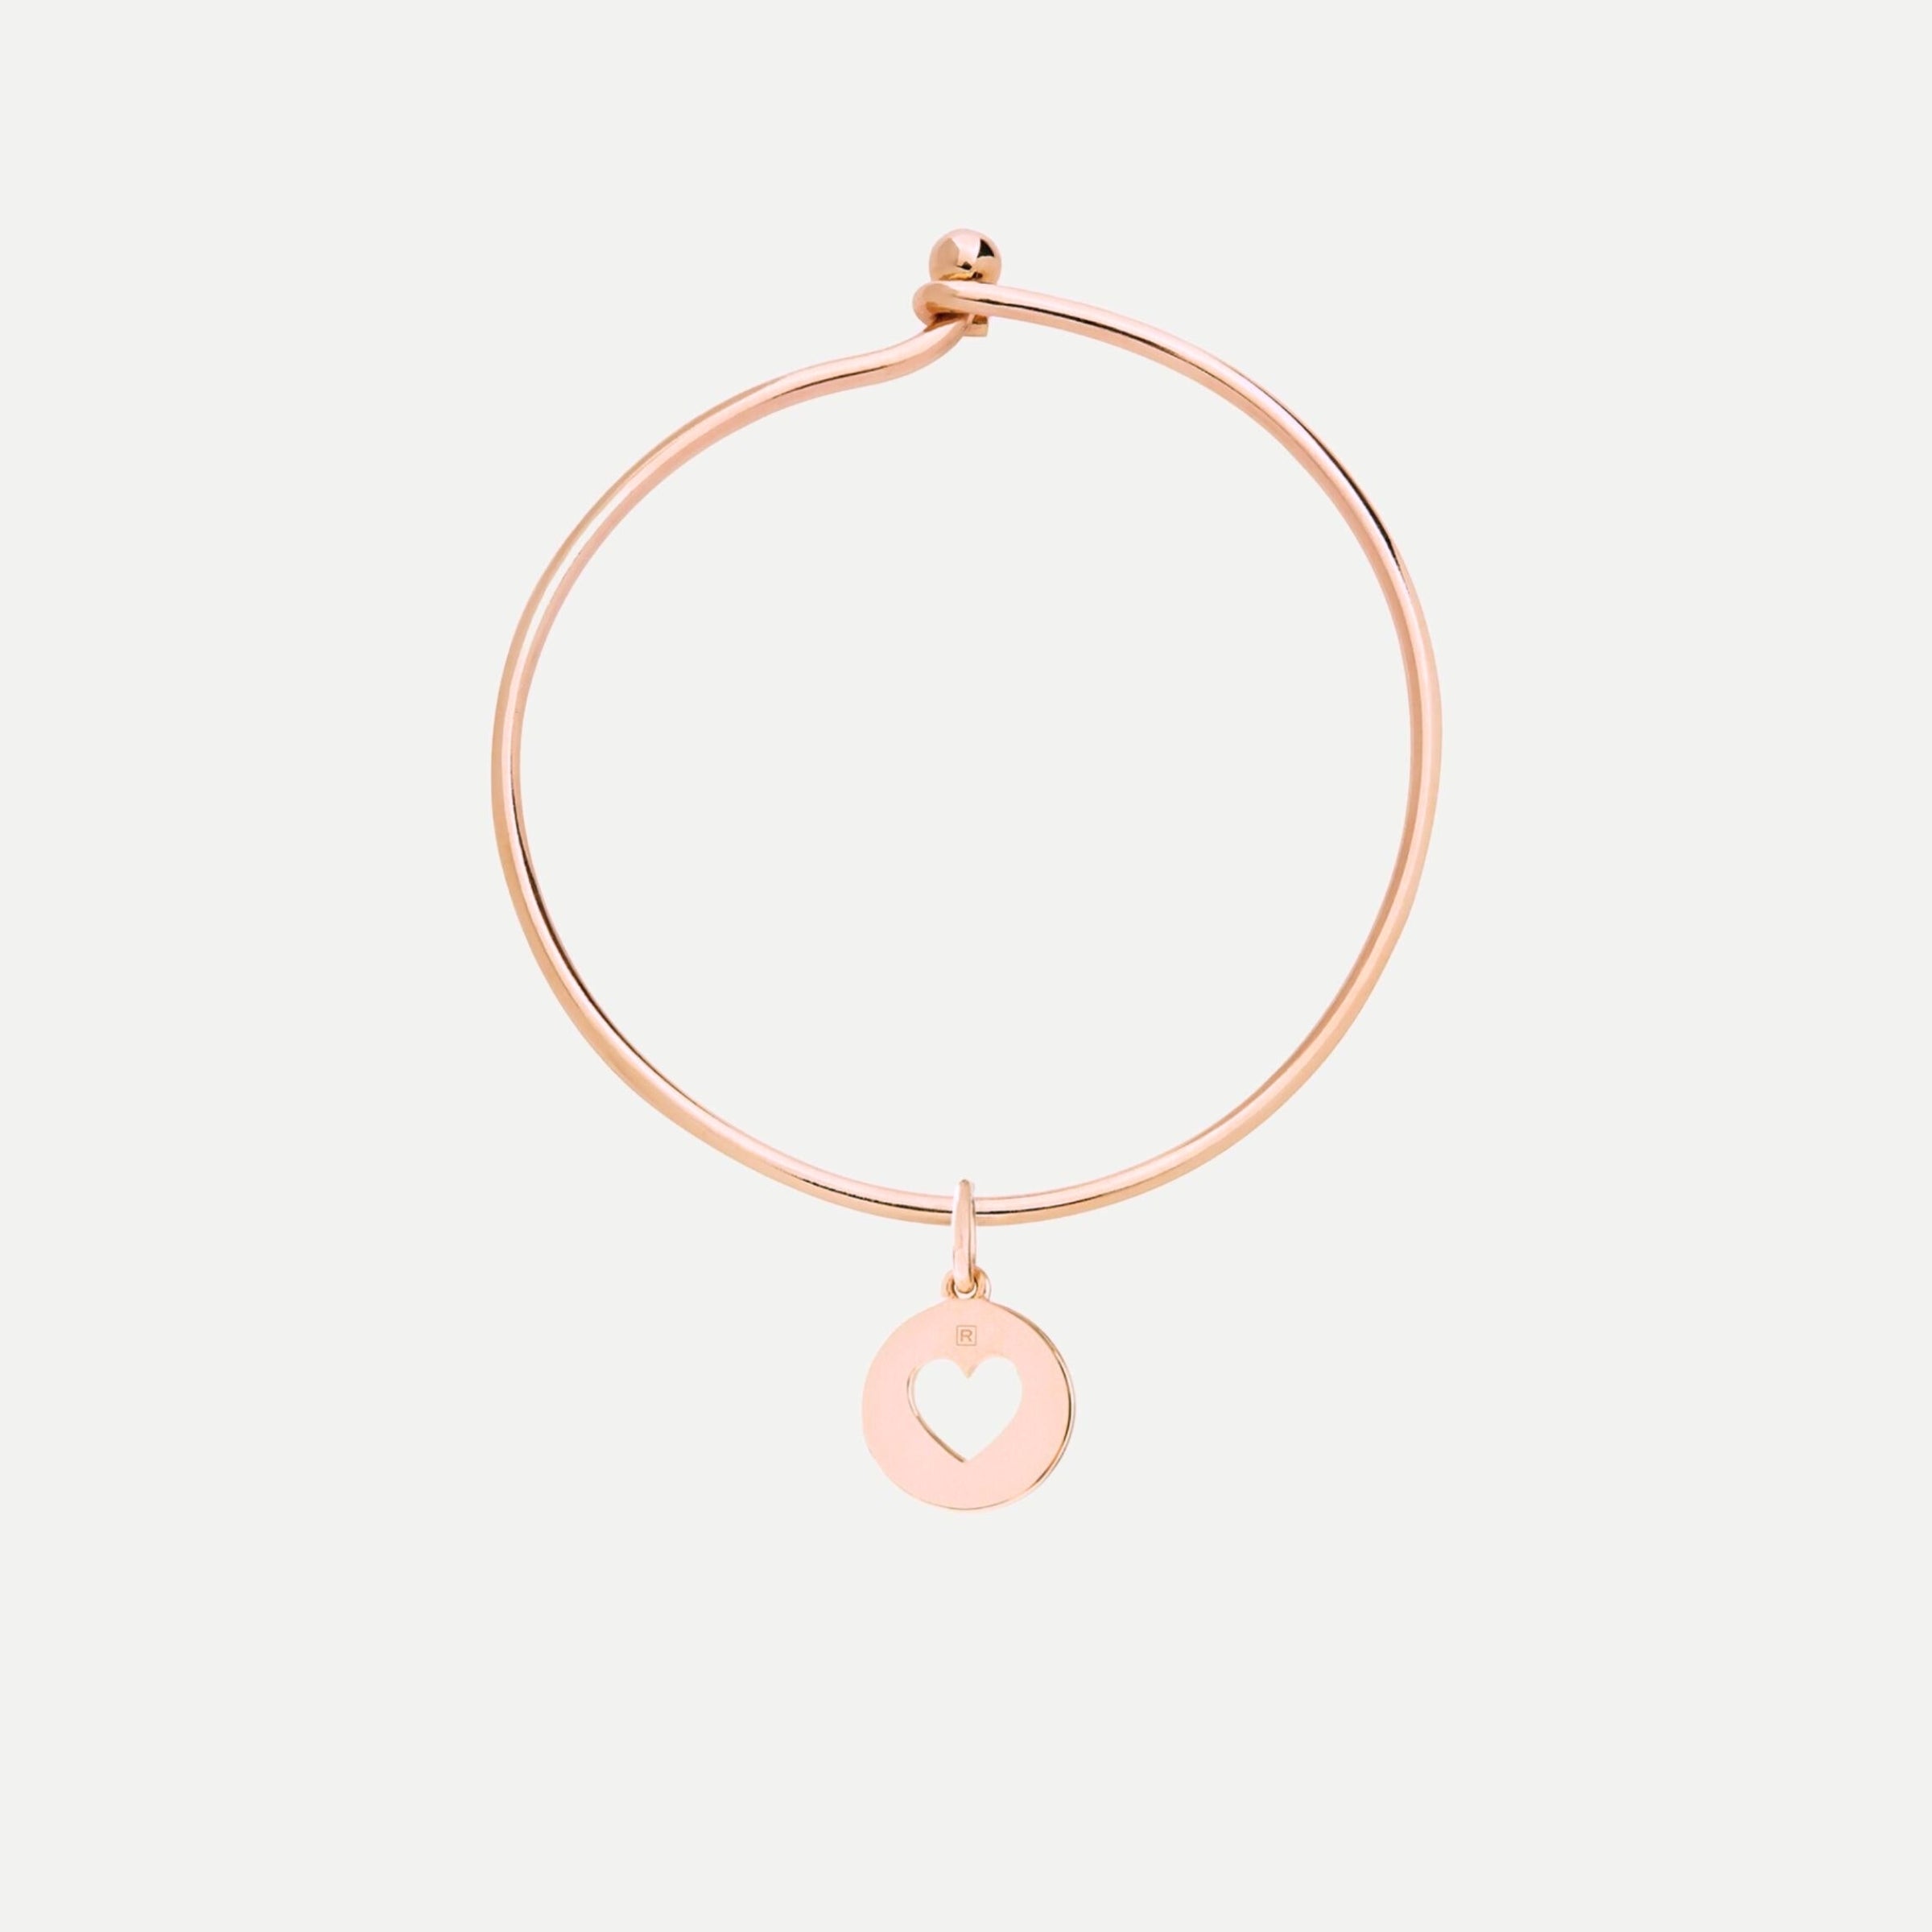 Rose Gold Vermeil Bangle and Gold Heart Popon Gift Set